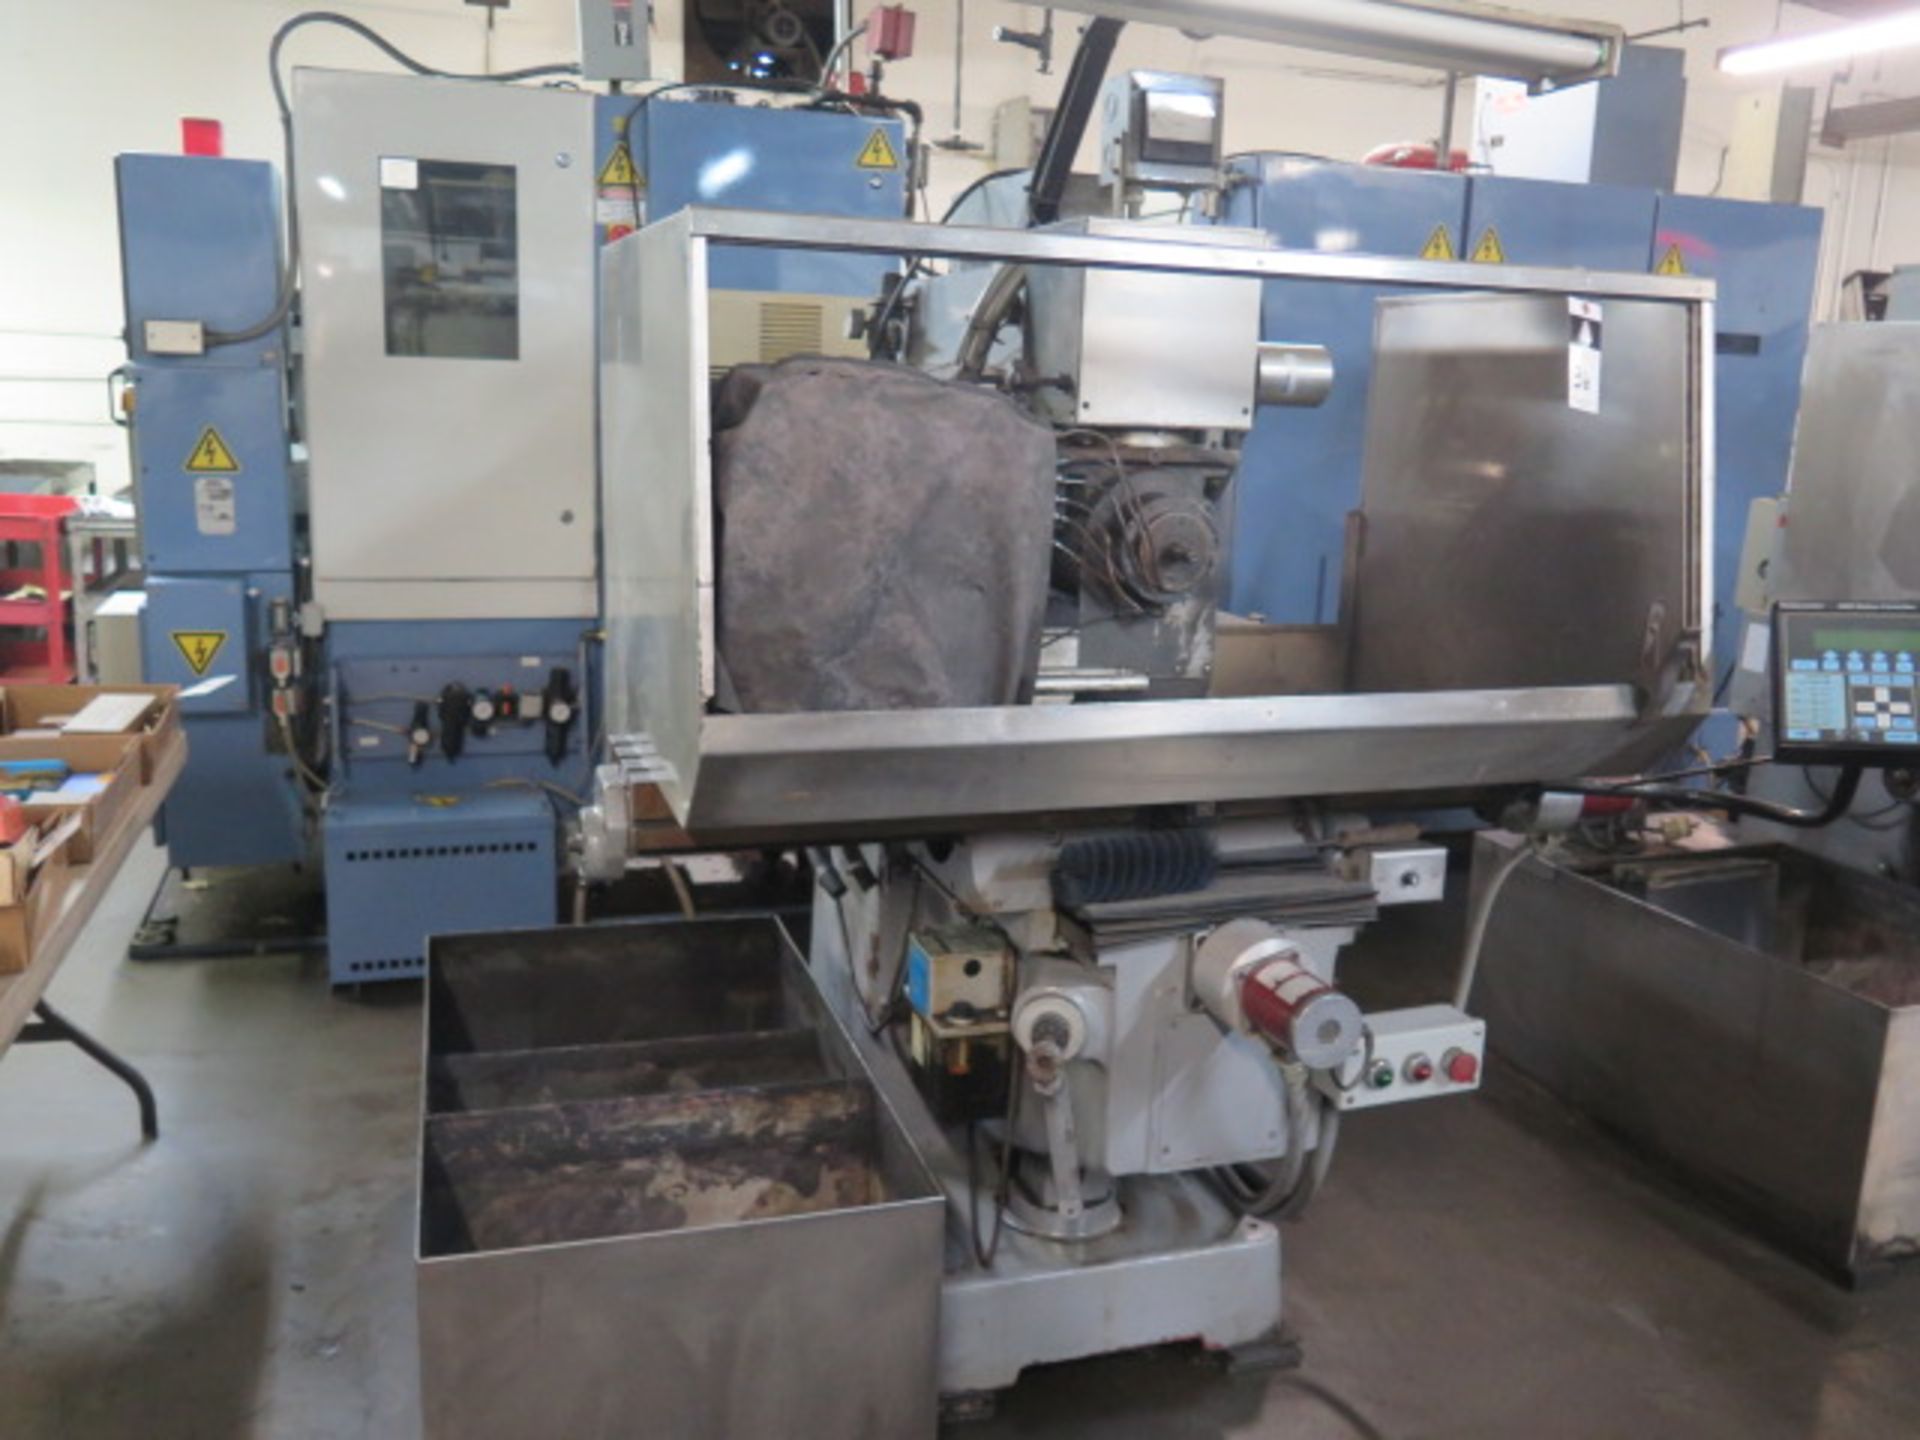 Custom 4-Axis CNC Tool and Cutter Grinders w/ Compumotor 4000 Controls (SOLD AS-IS - NO WARRANTY)